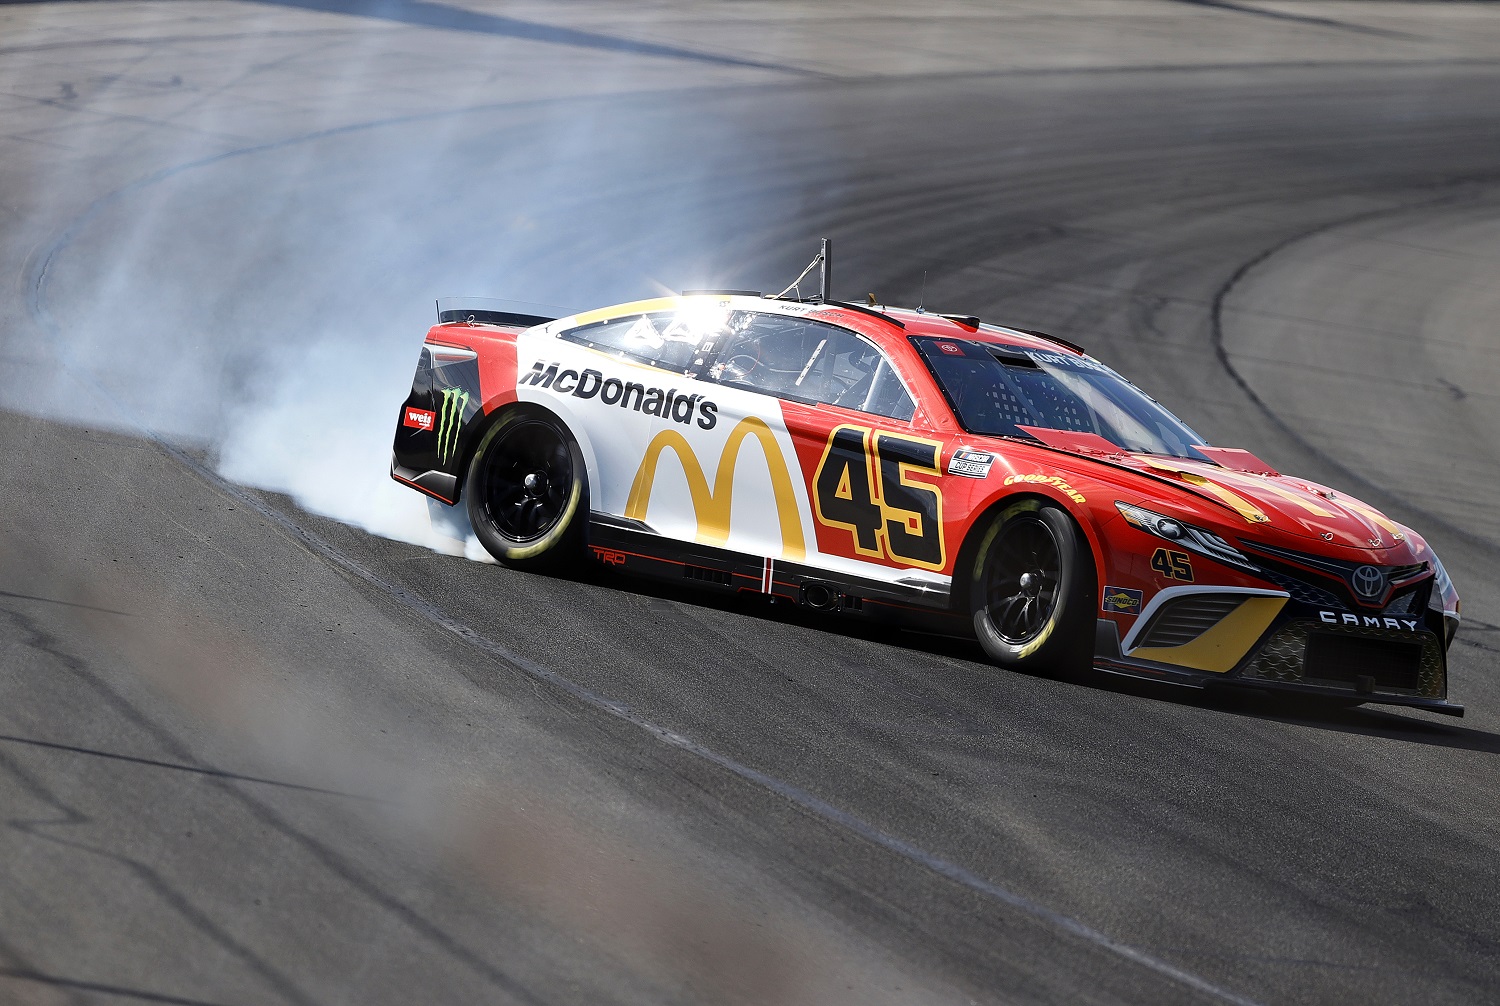 Kurt Busch spins after an on-track incident in the No. 45 Toyota during qualifying for the NASCAR Cup Series M&Ms Fan Appreciation 400 on July 23, 2022, in Long Pond, Pennsylvania.